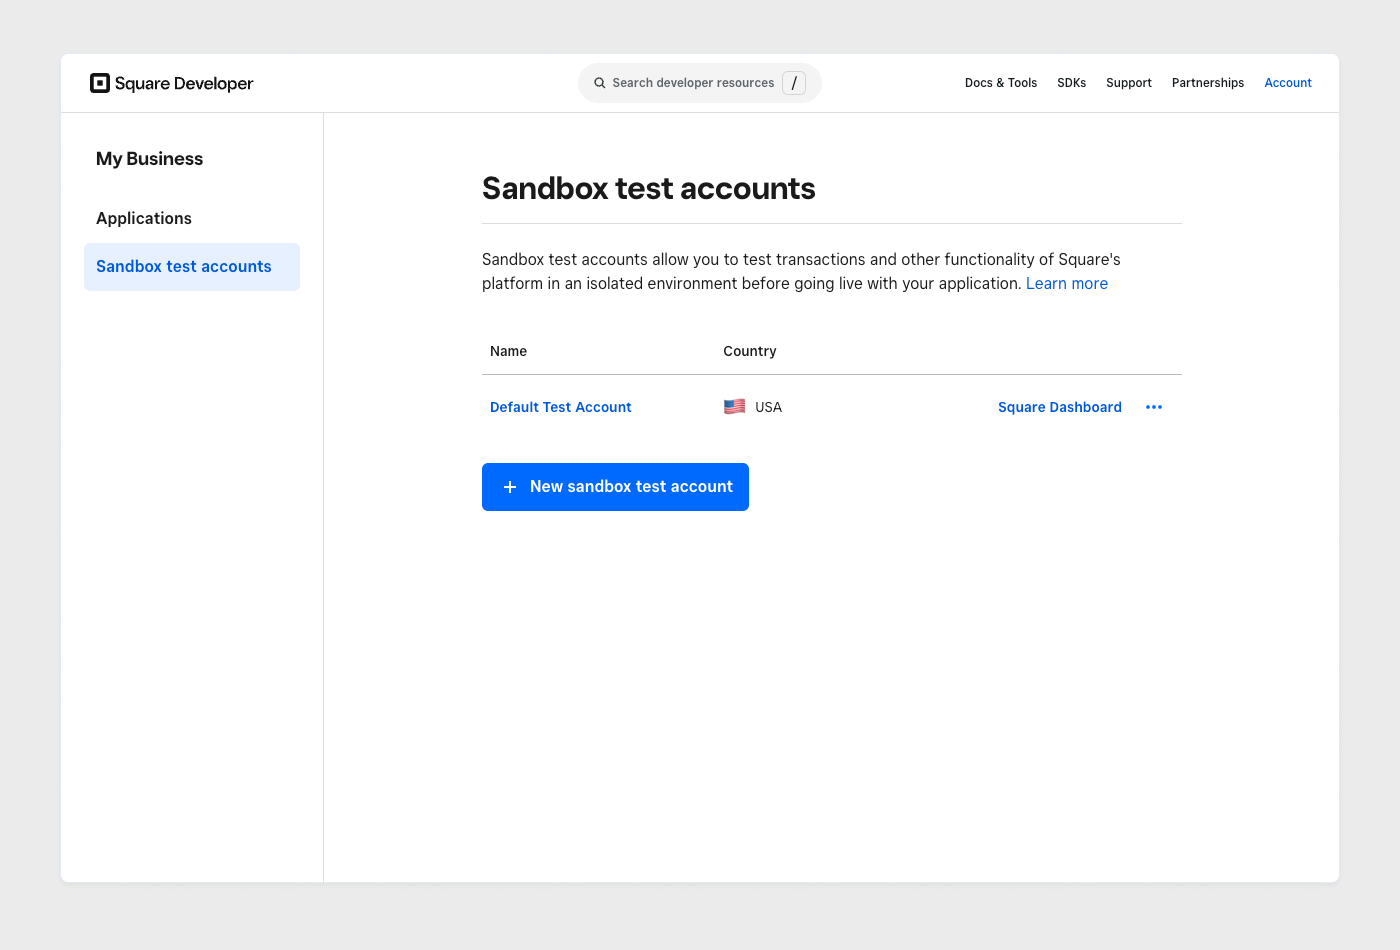 A screenshot showing the Developer Dashboard main page with the test account's New sandbox text account button.